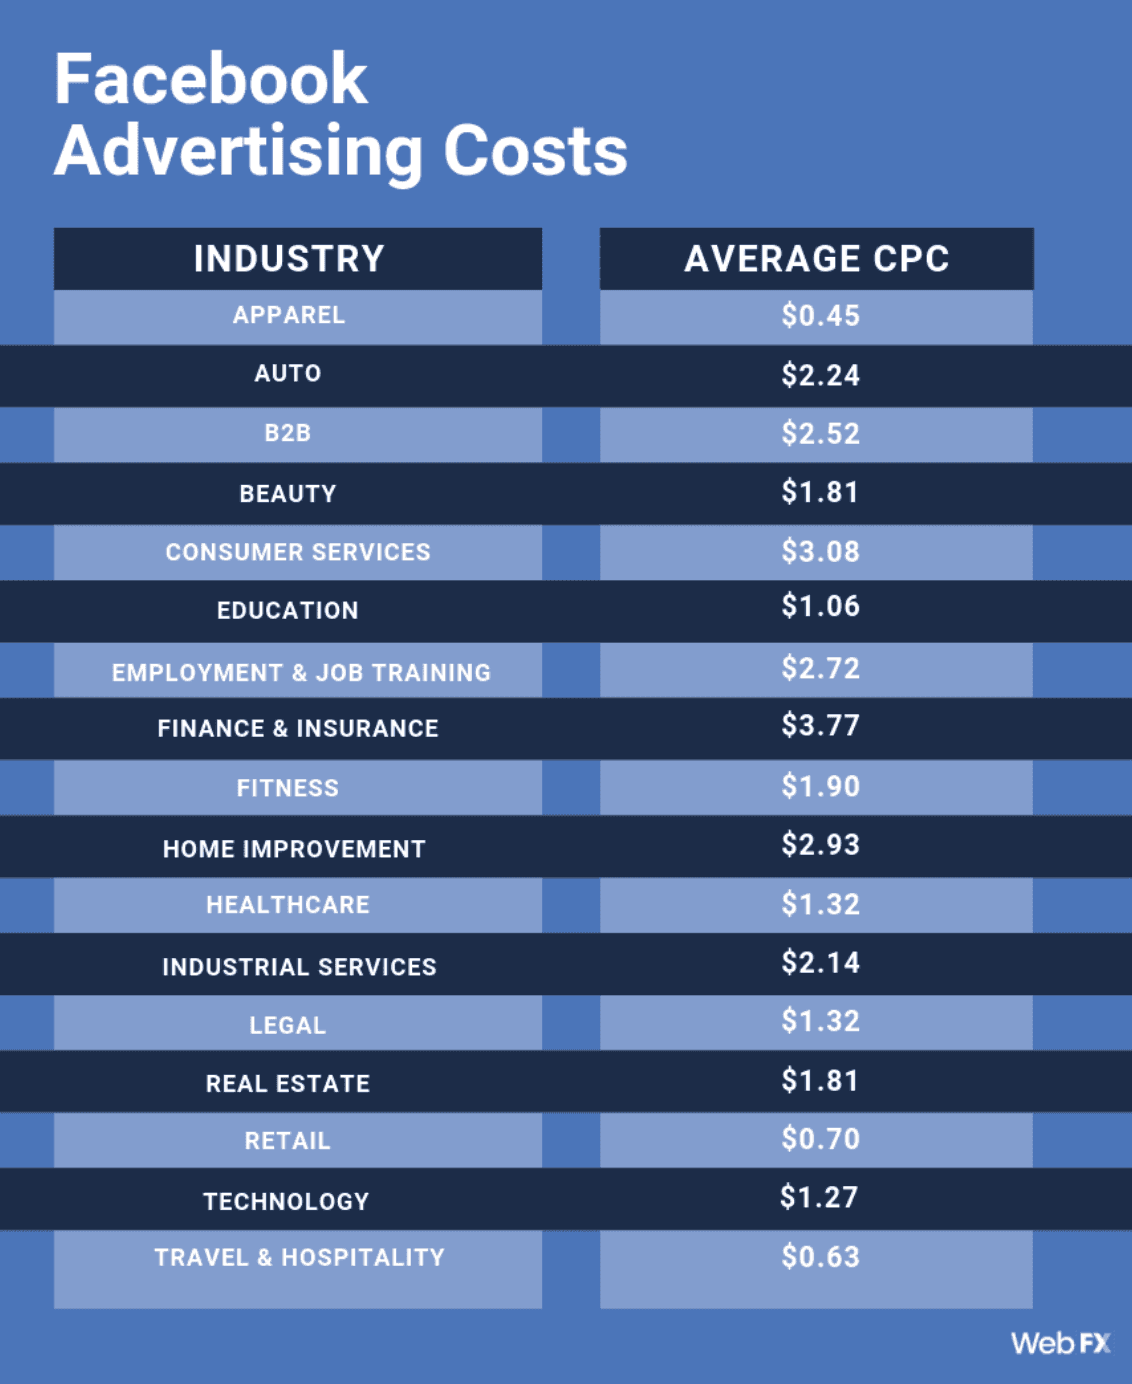 Facebook advertising costs for industries and average cost per click